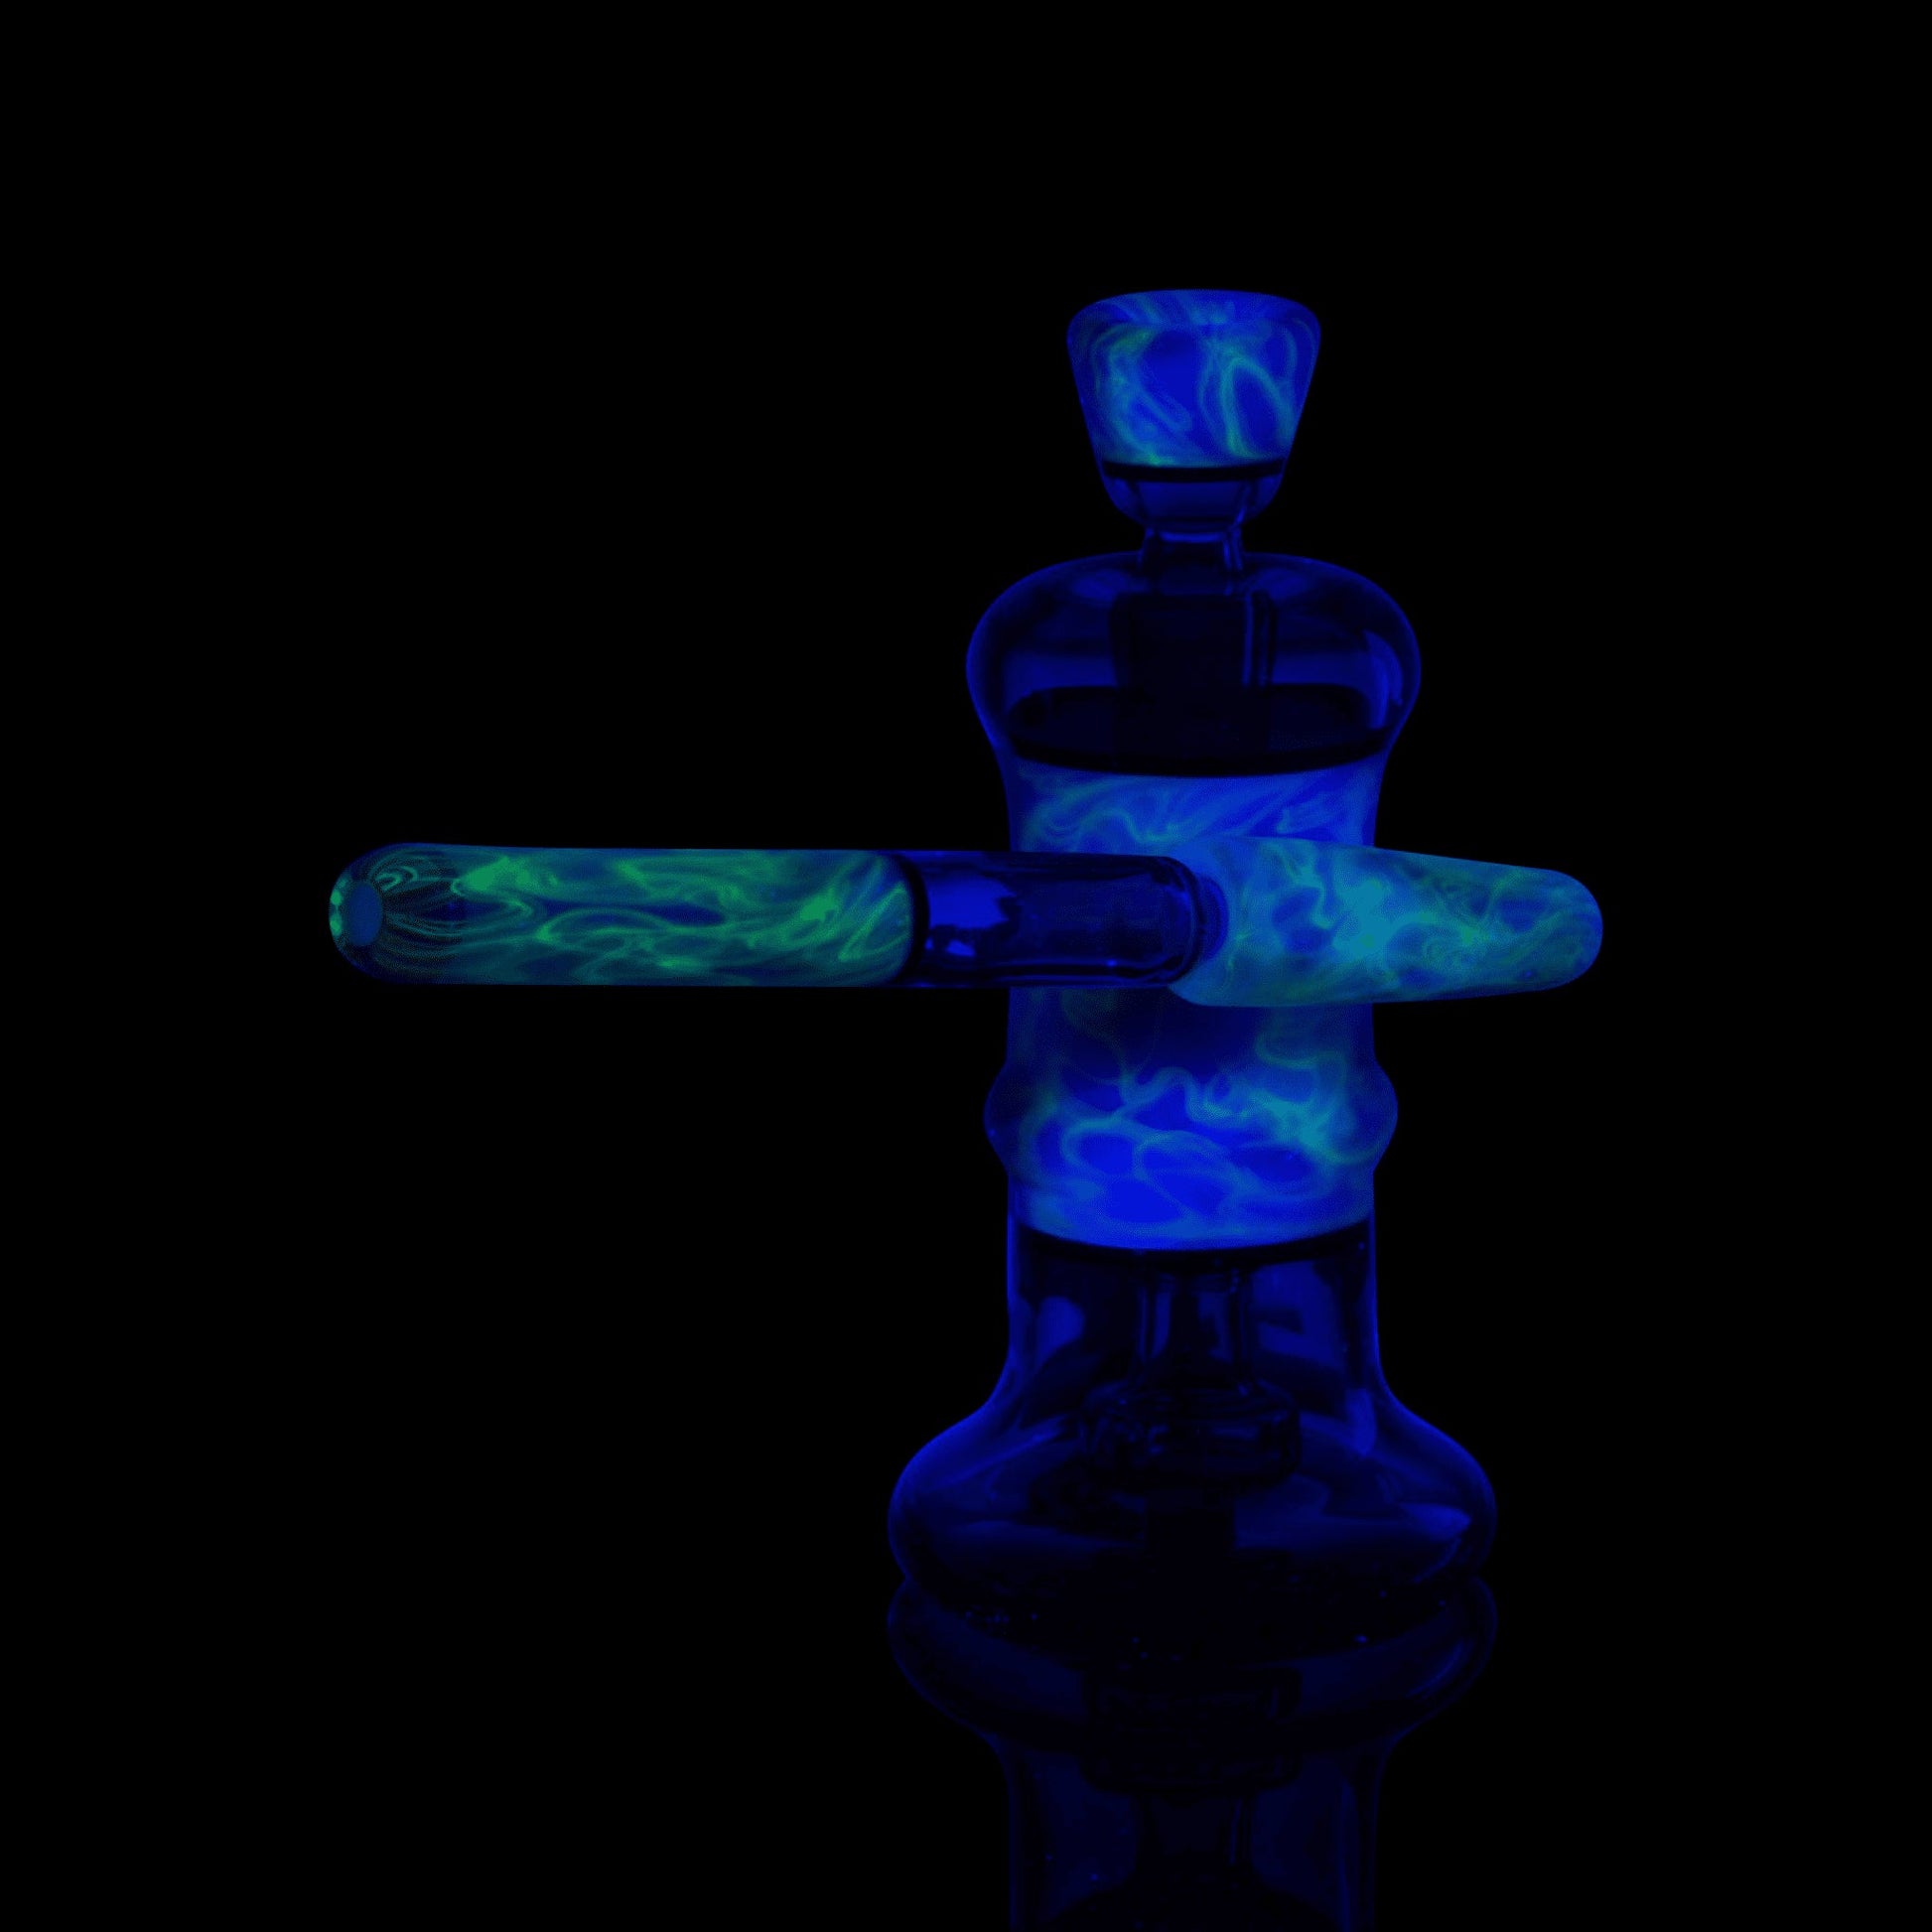 exquisite design of the Collab Ceremonial Three Piece Water Pipe by Elks That Run x Scomo Moanet (Scribble Season 2022)